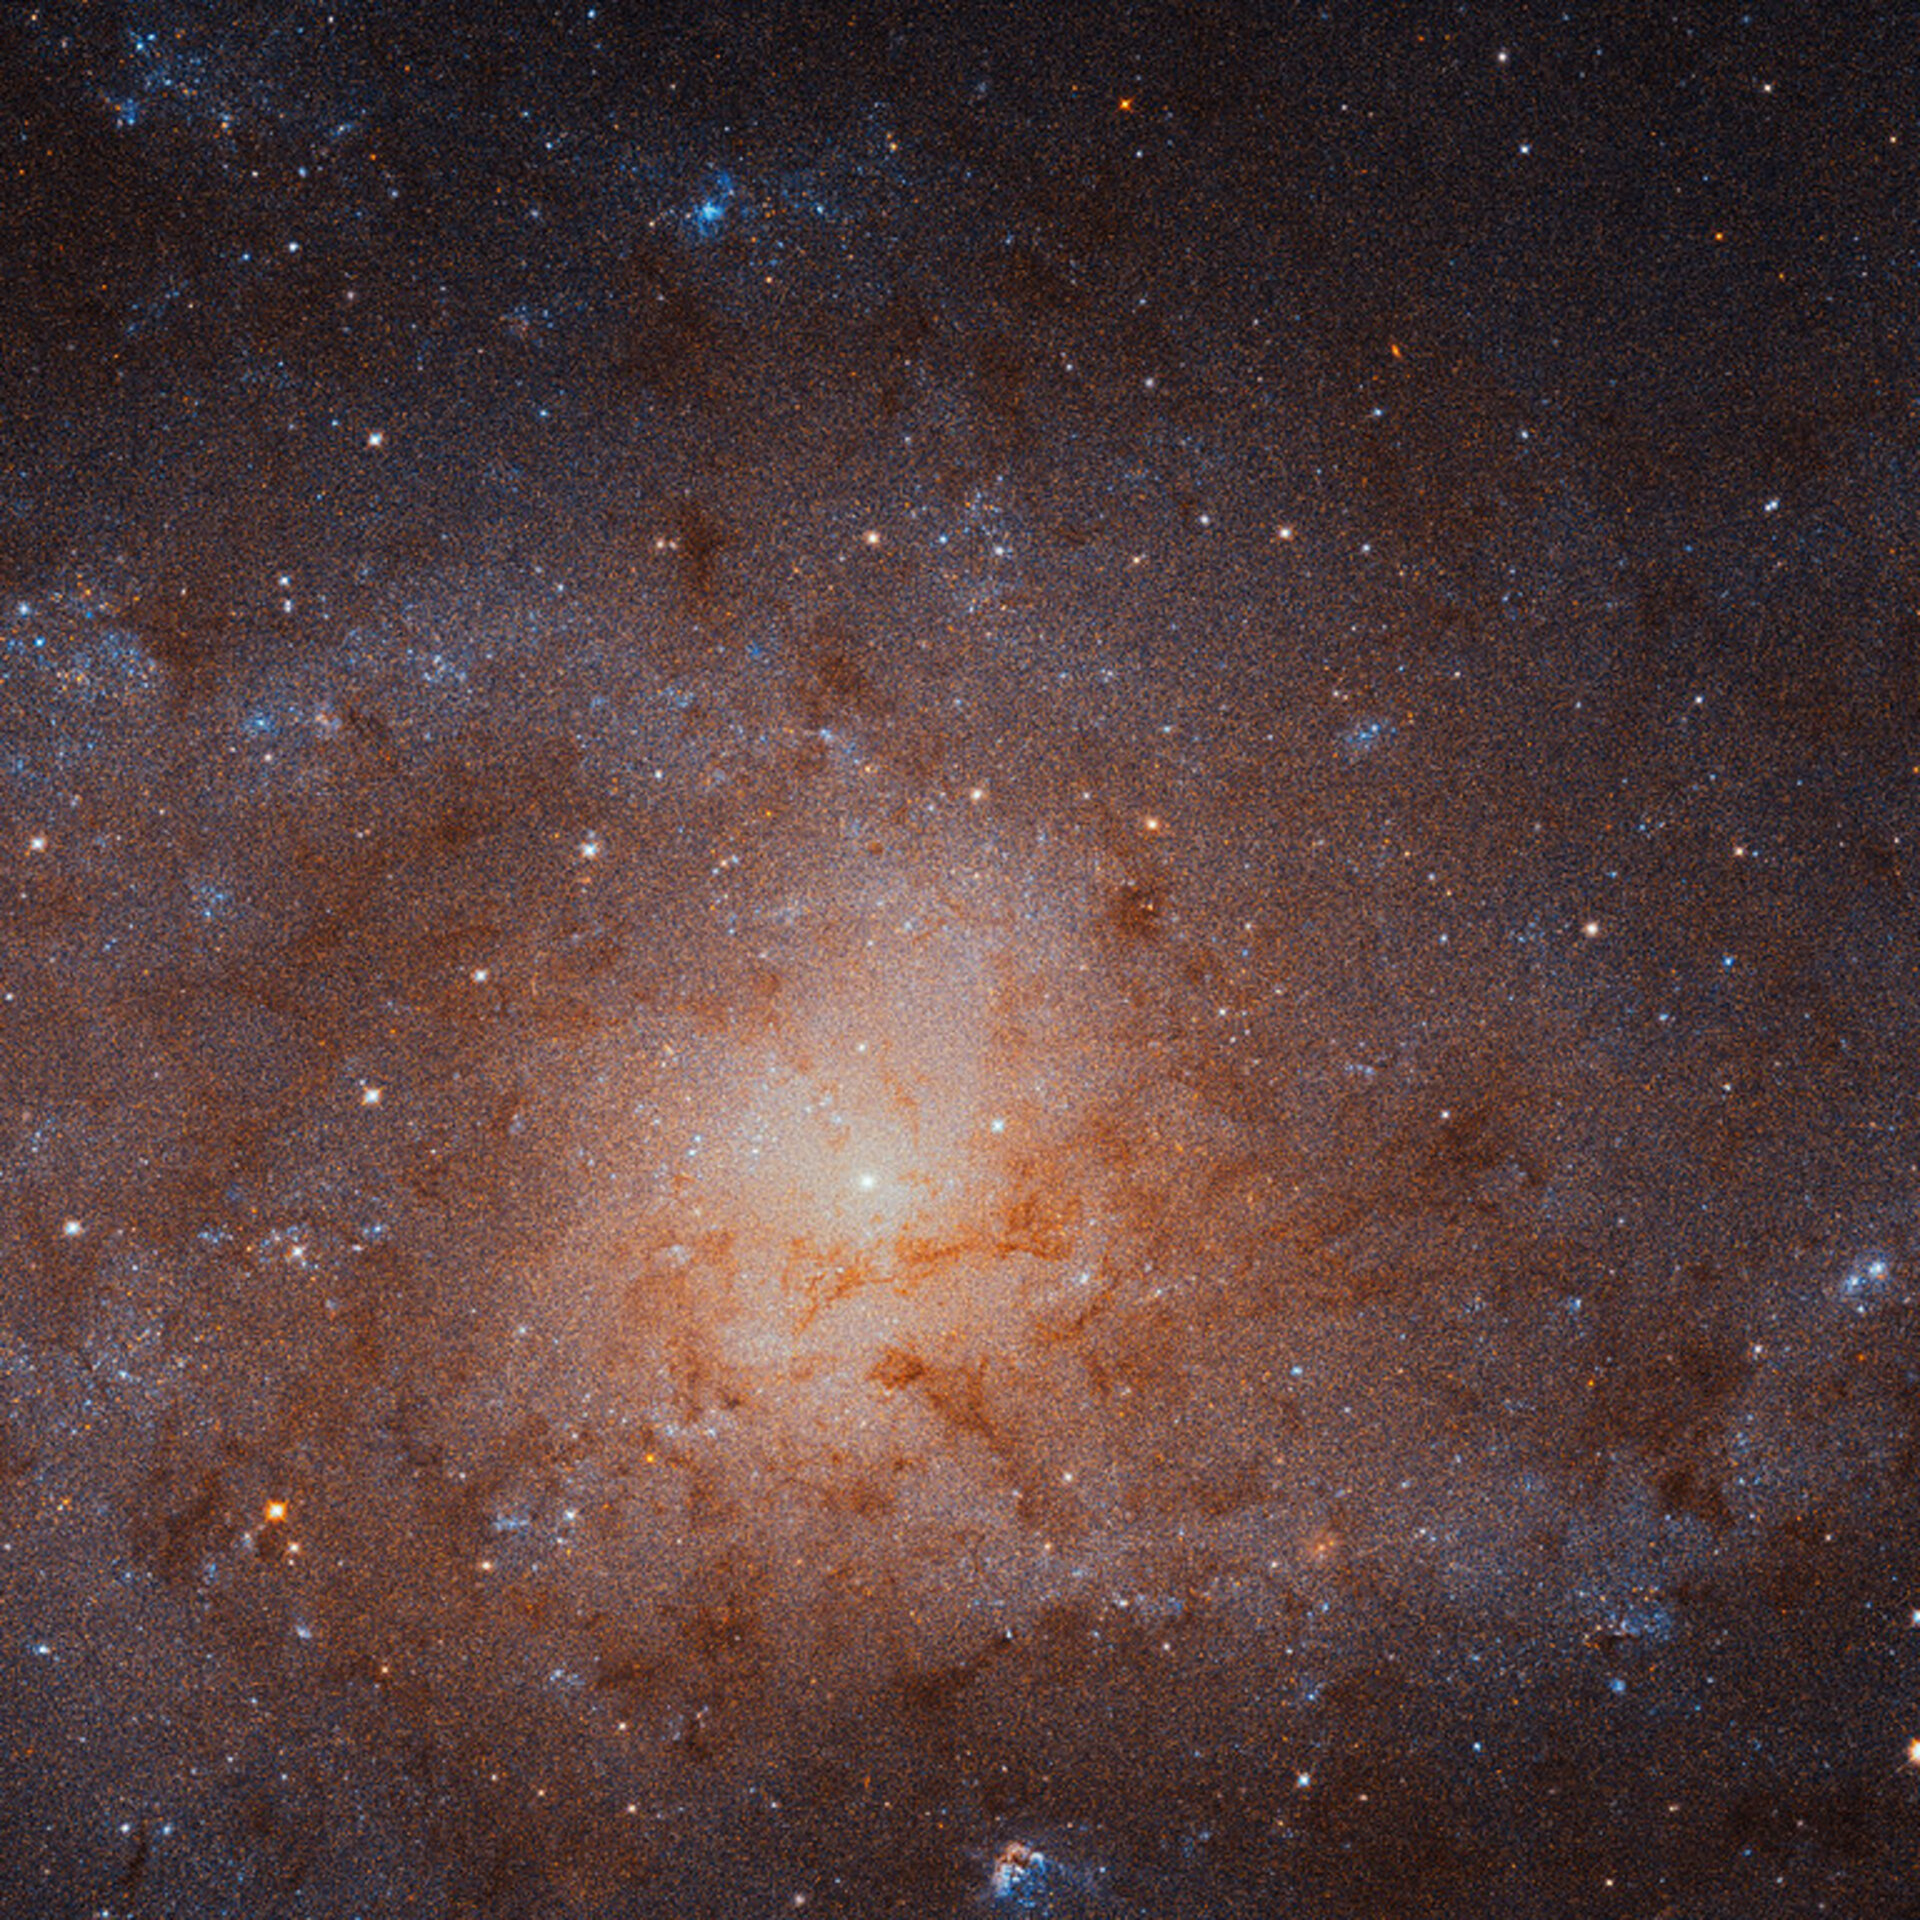 The sharpest view ever of the Triangulum Galaxy